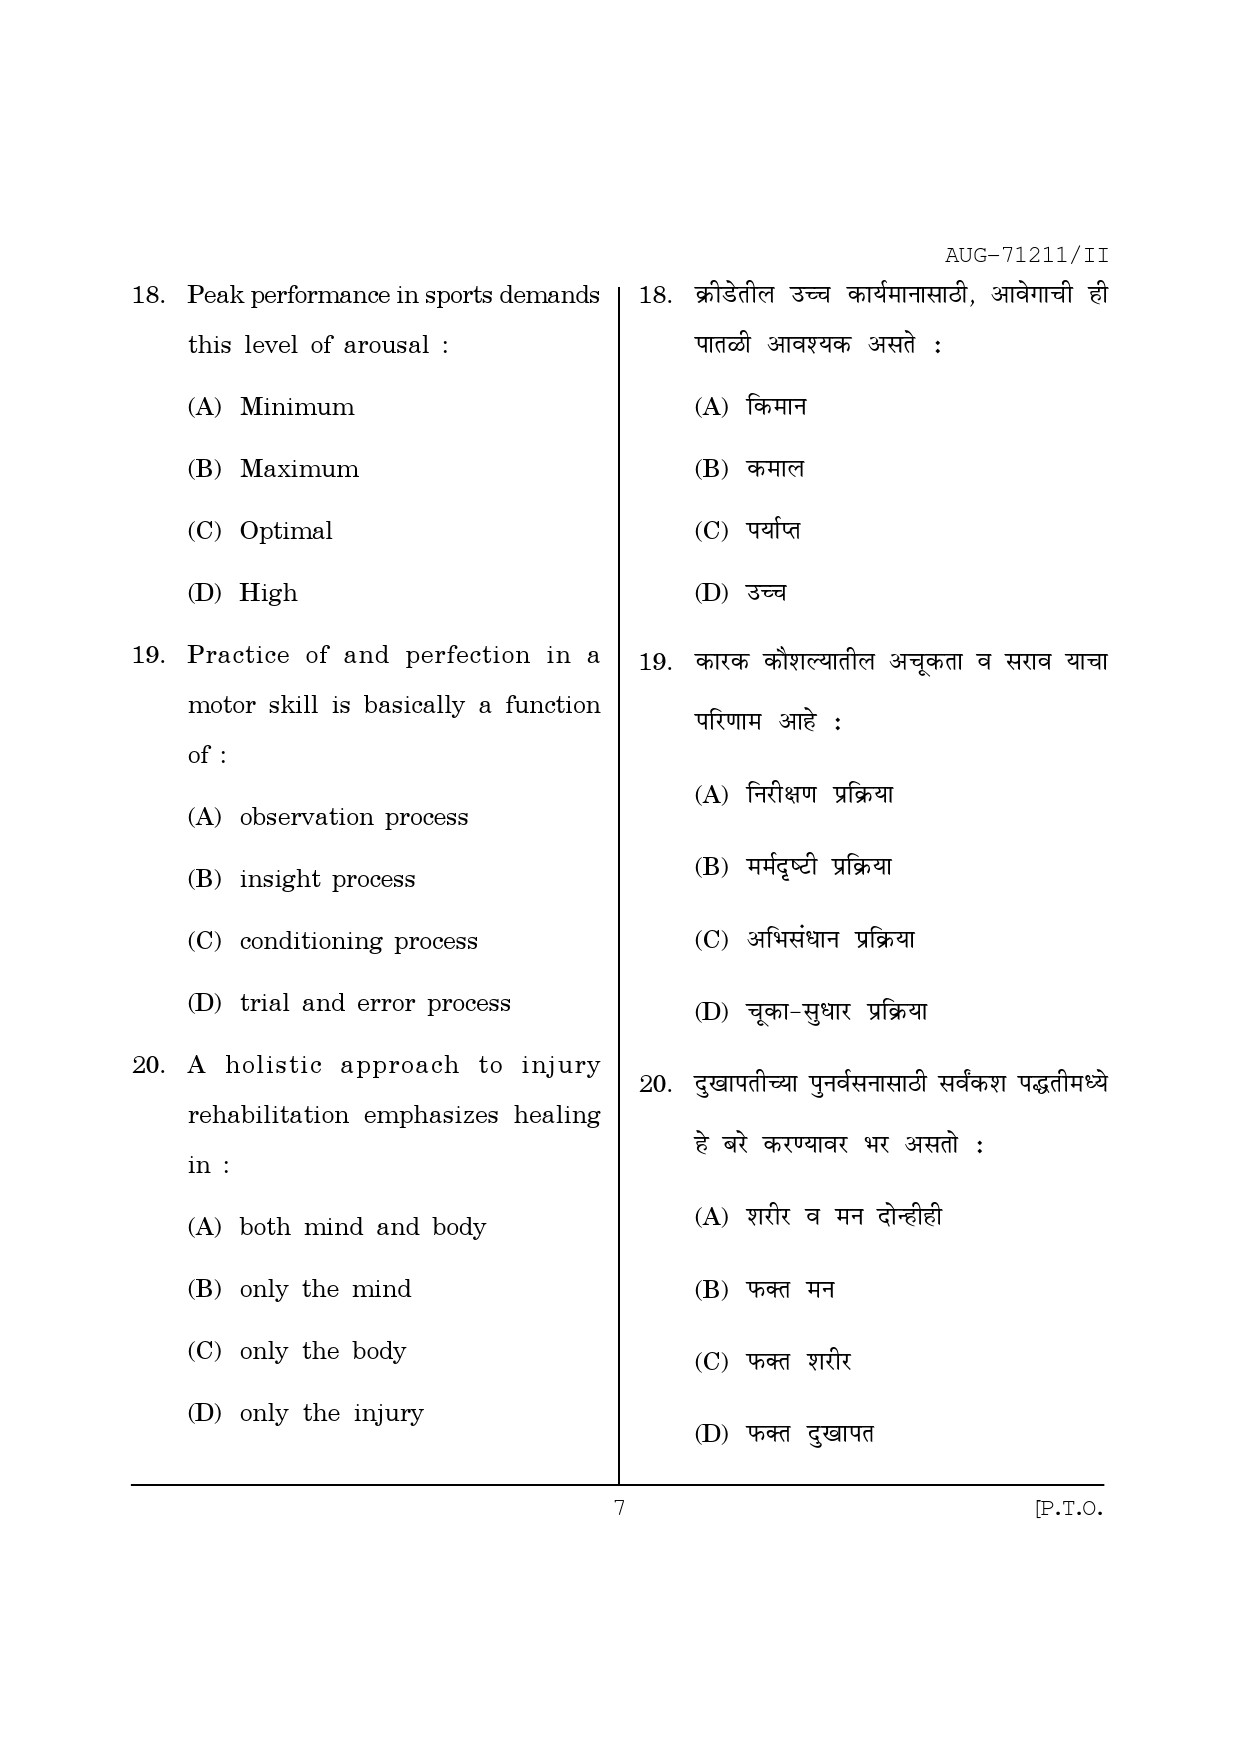 Maharashtra SET Physical Education Question Paper II August 2011 7